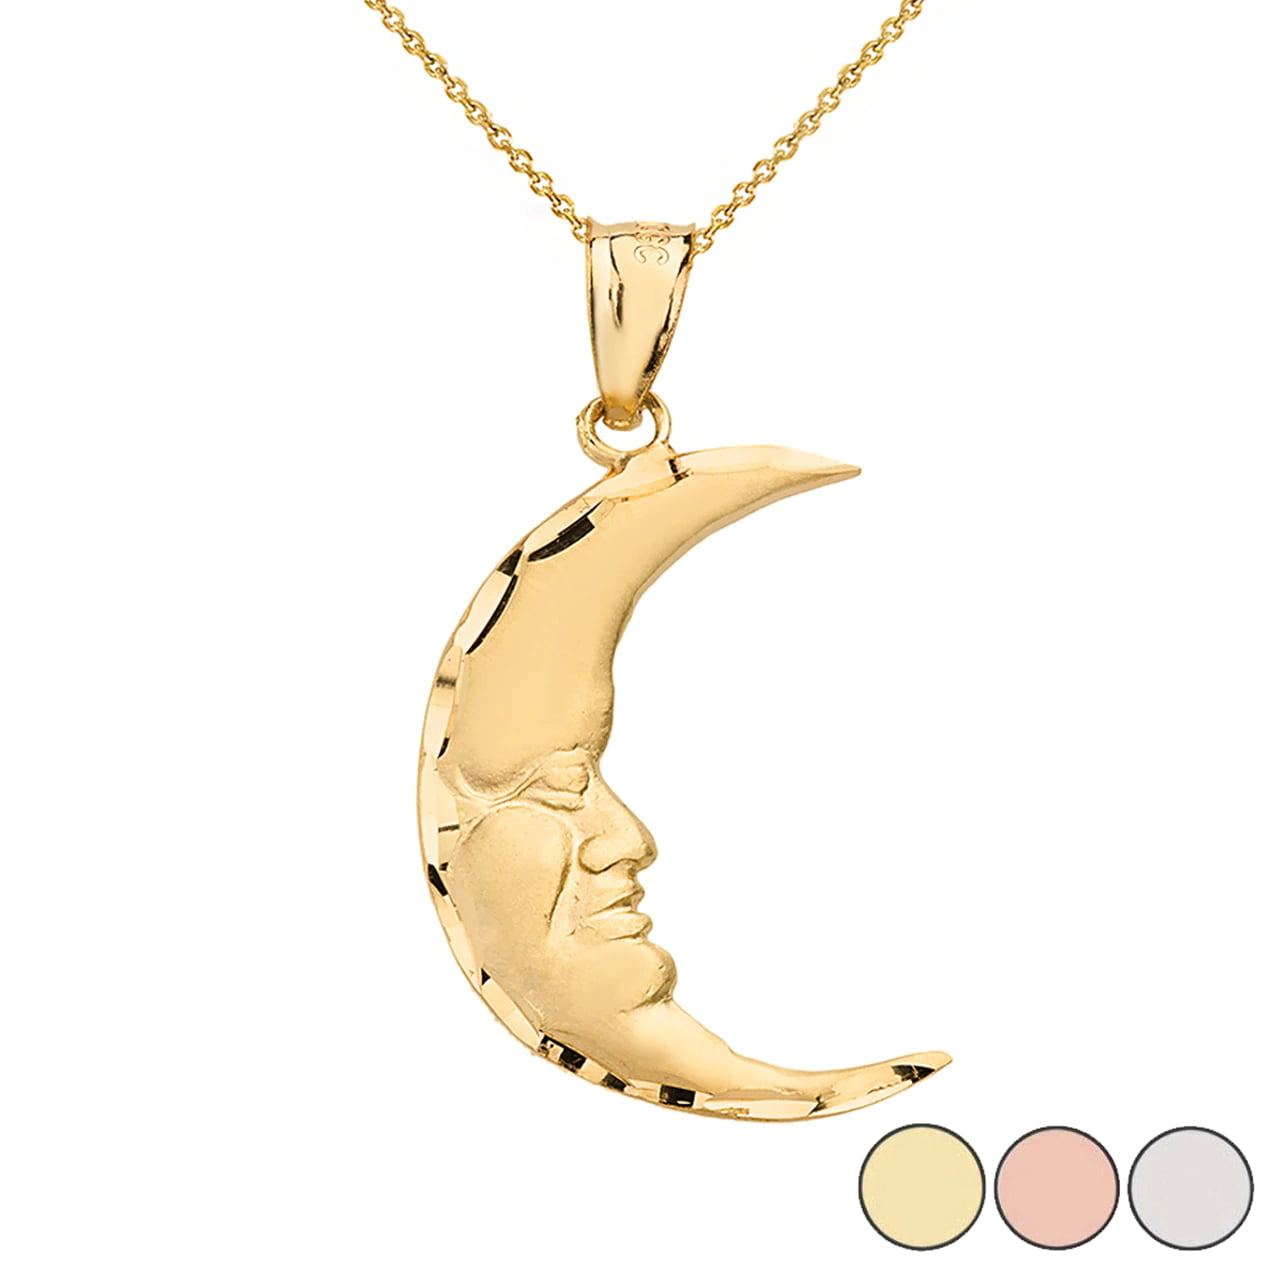 Rose Gold-plated Silver 22mm Moon Face Pendant